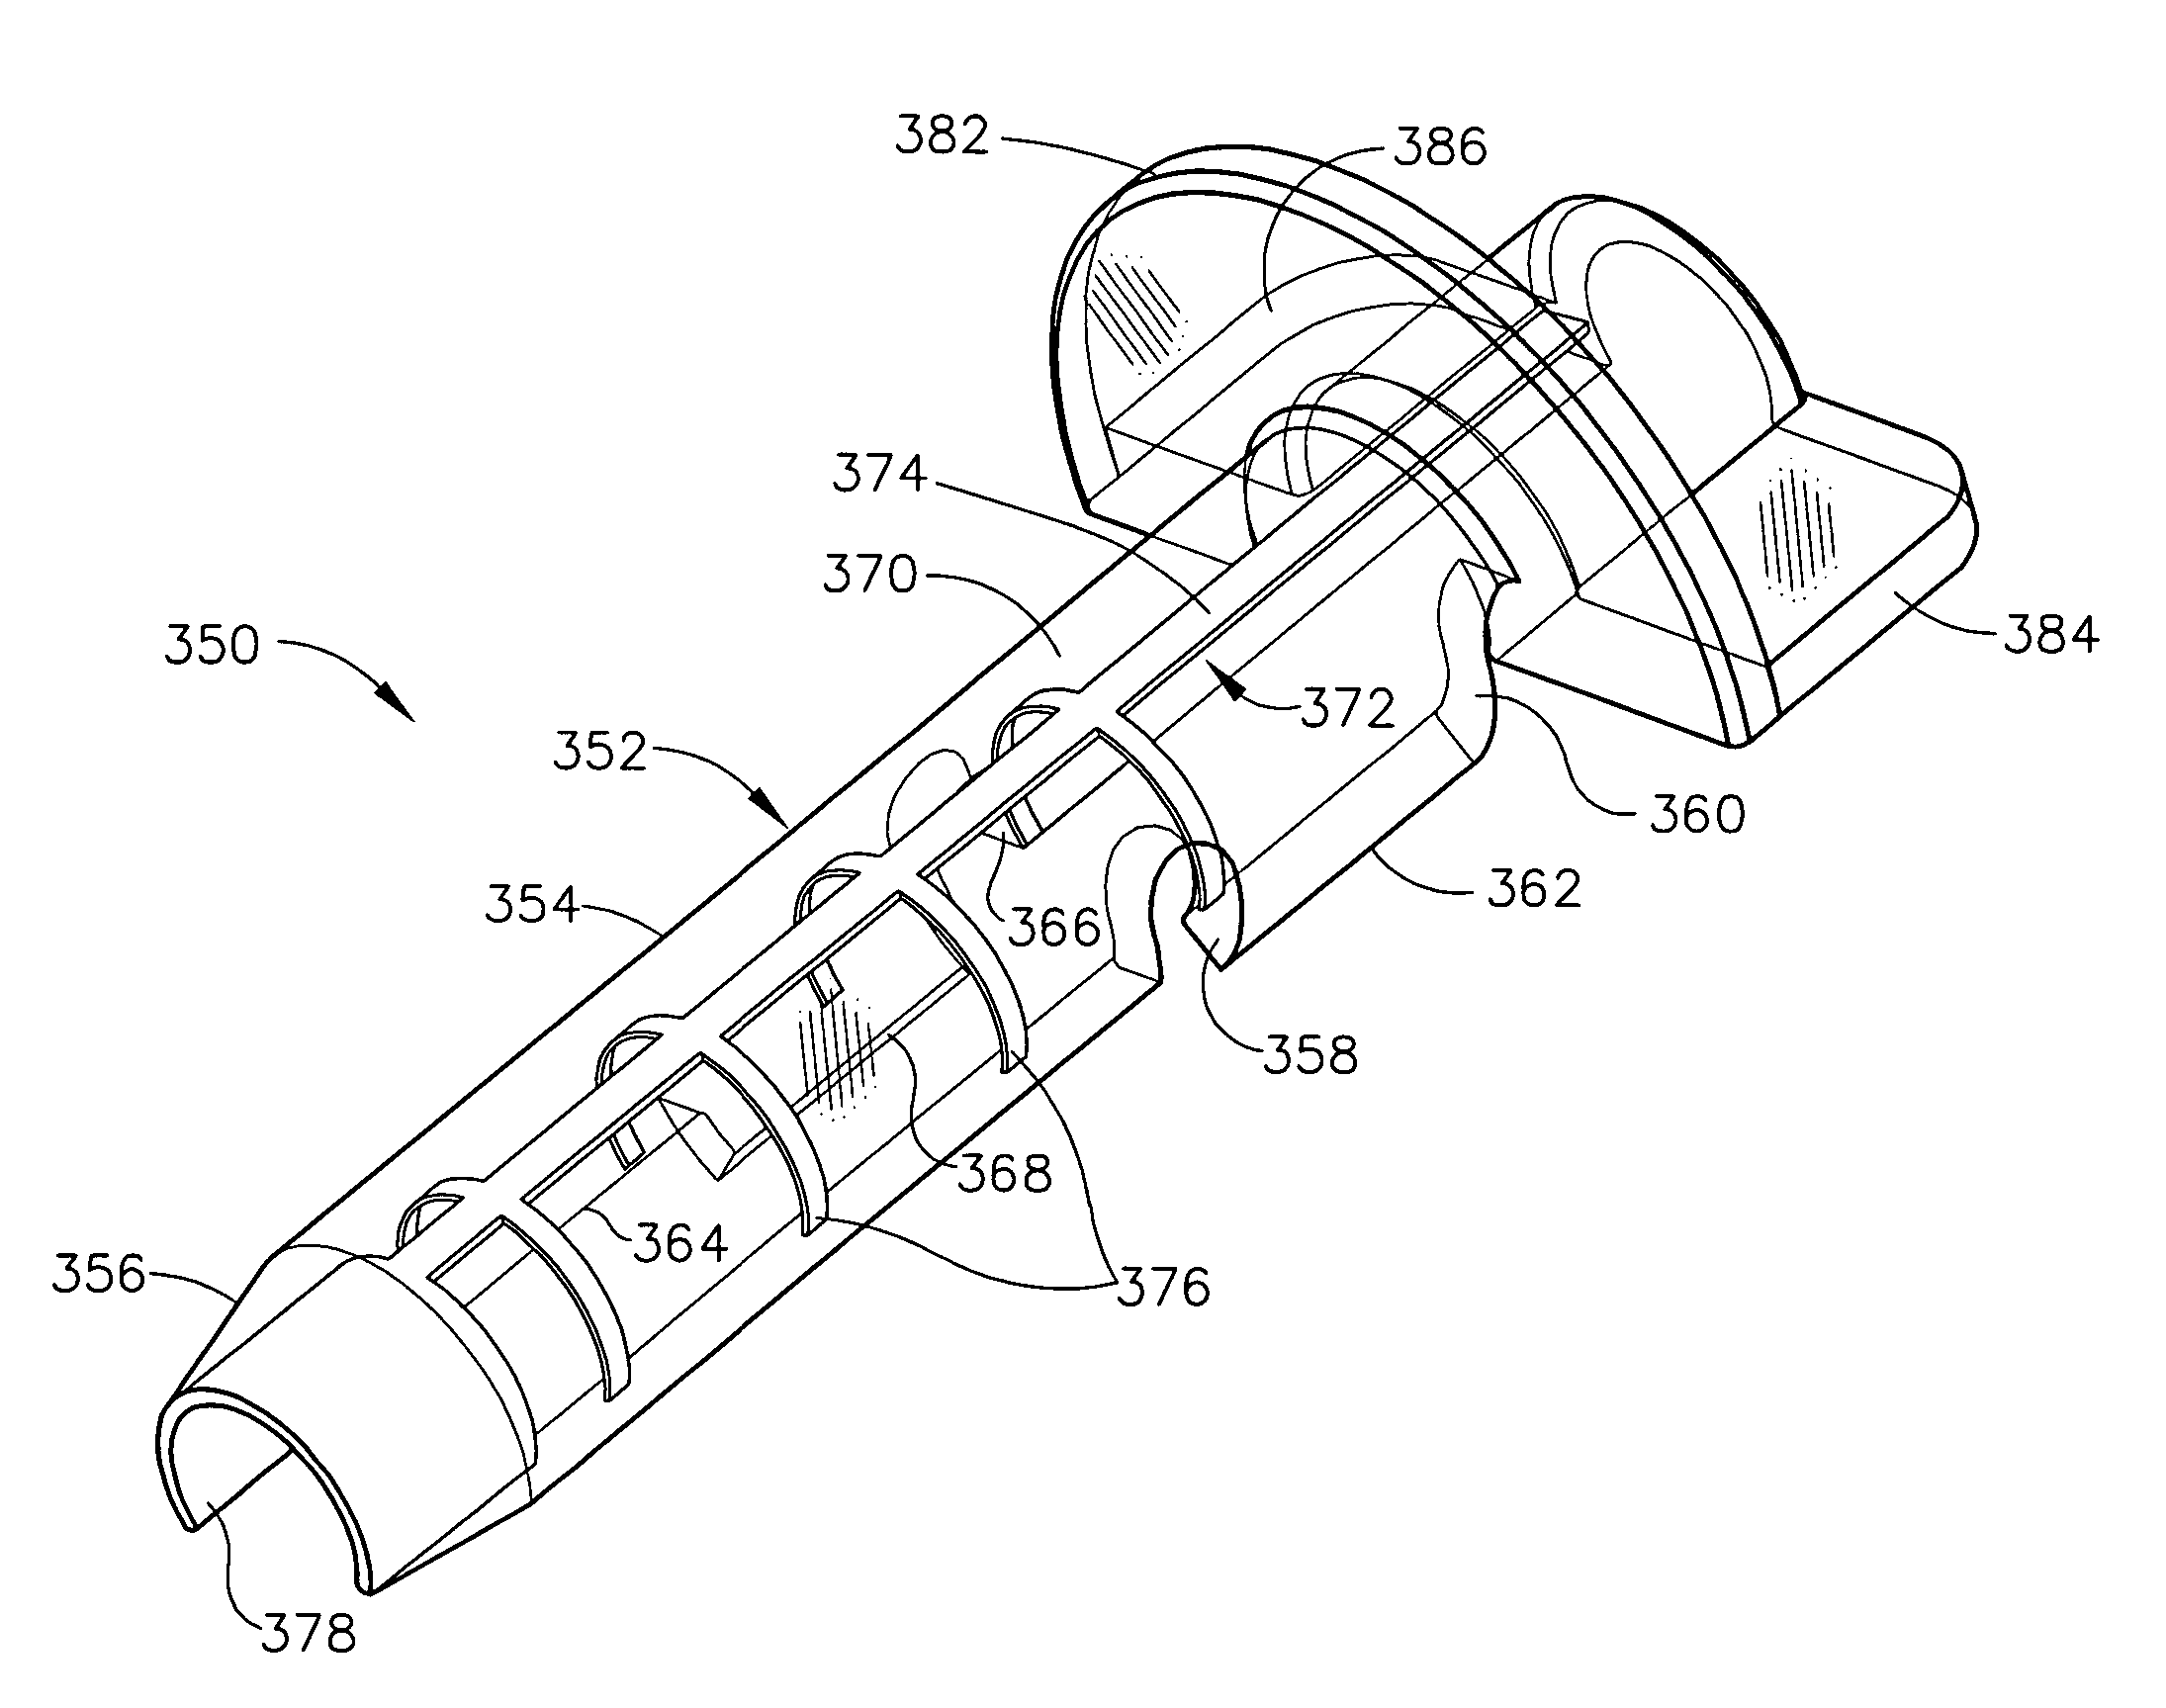 Biopsy device incorporating an adjustable probe sleeve